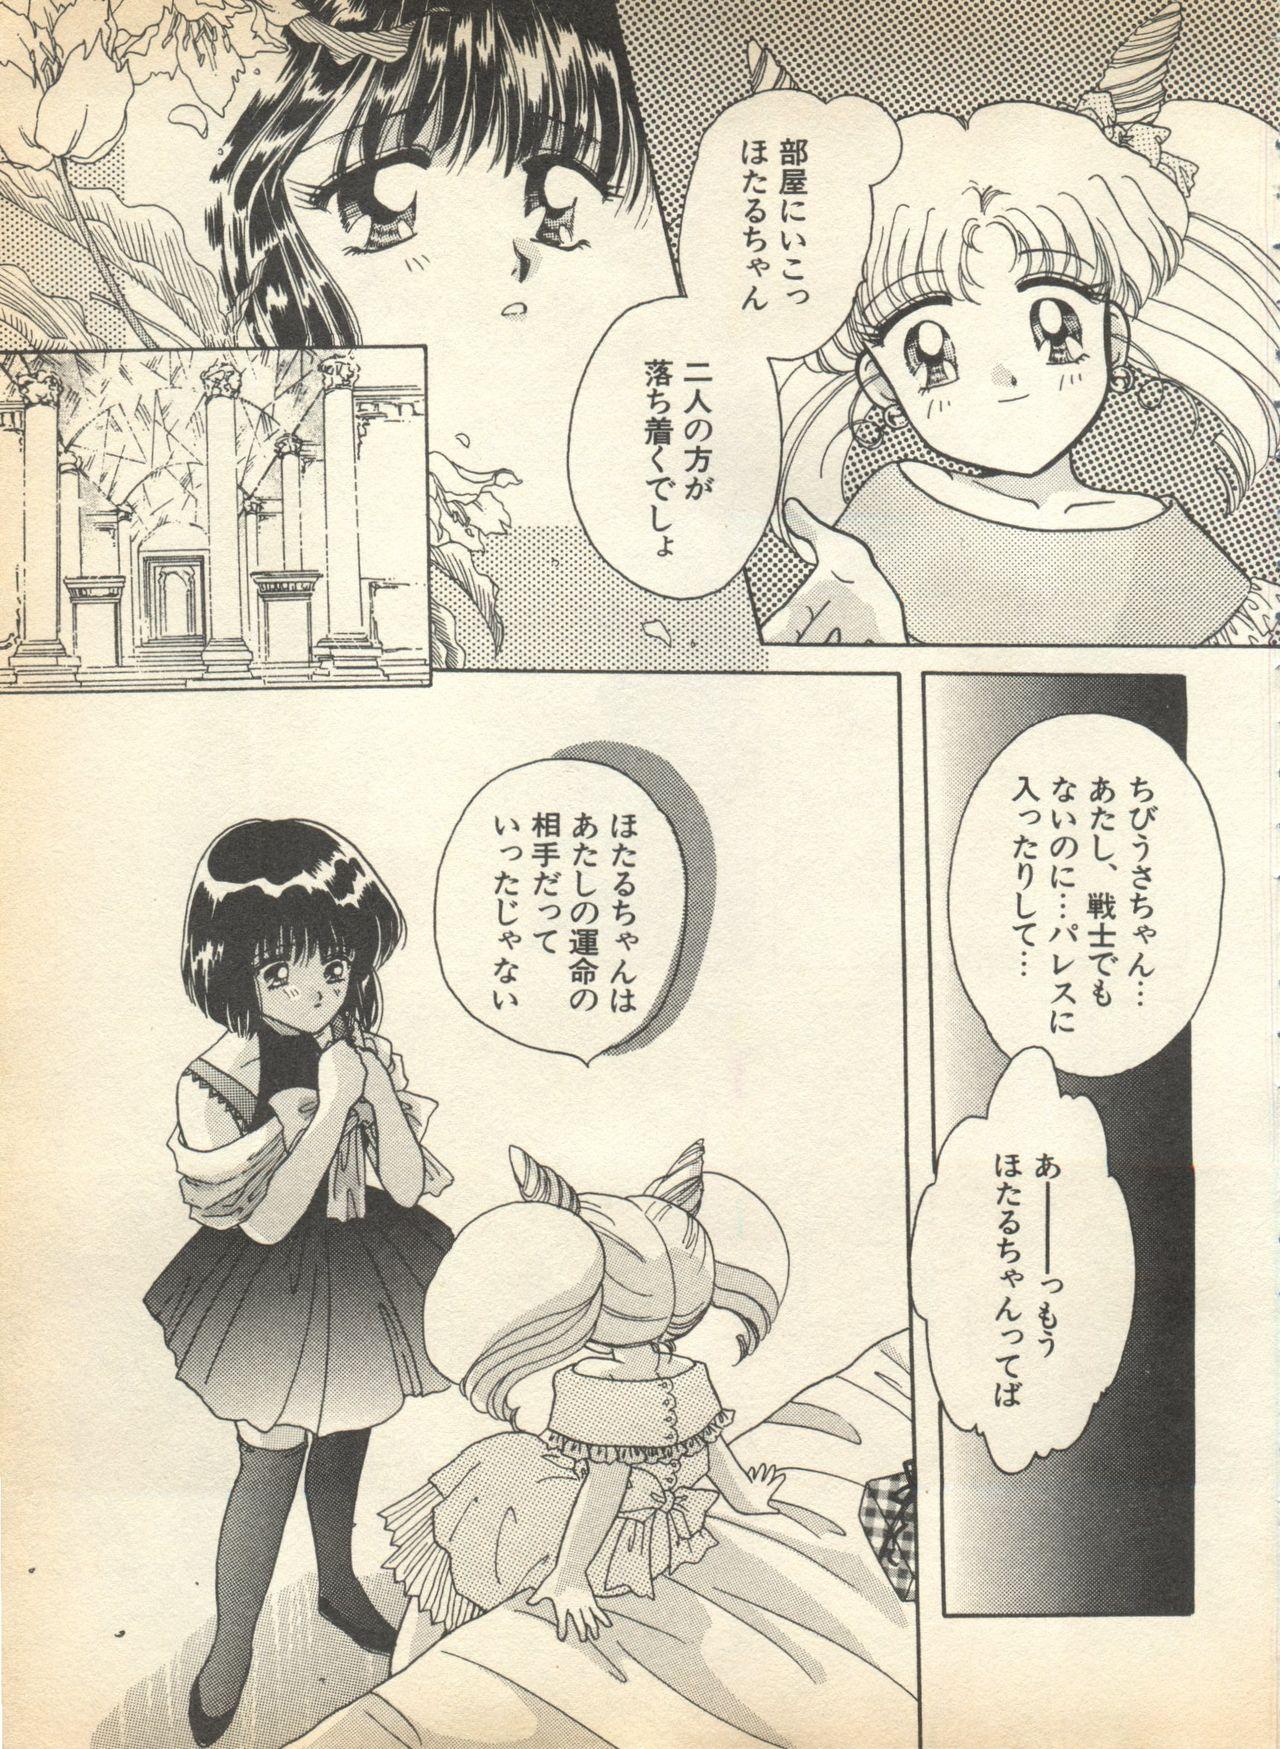 Hot Cunt Lunatic Party 8 - Sailor moon Awesome - Page 9